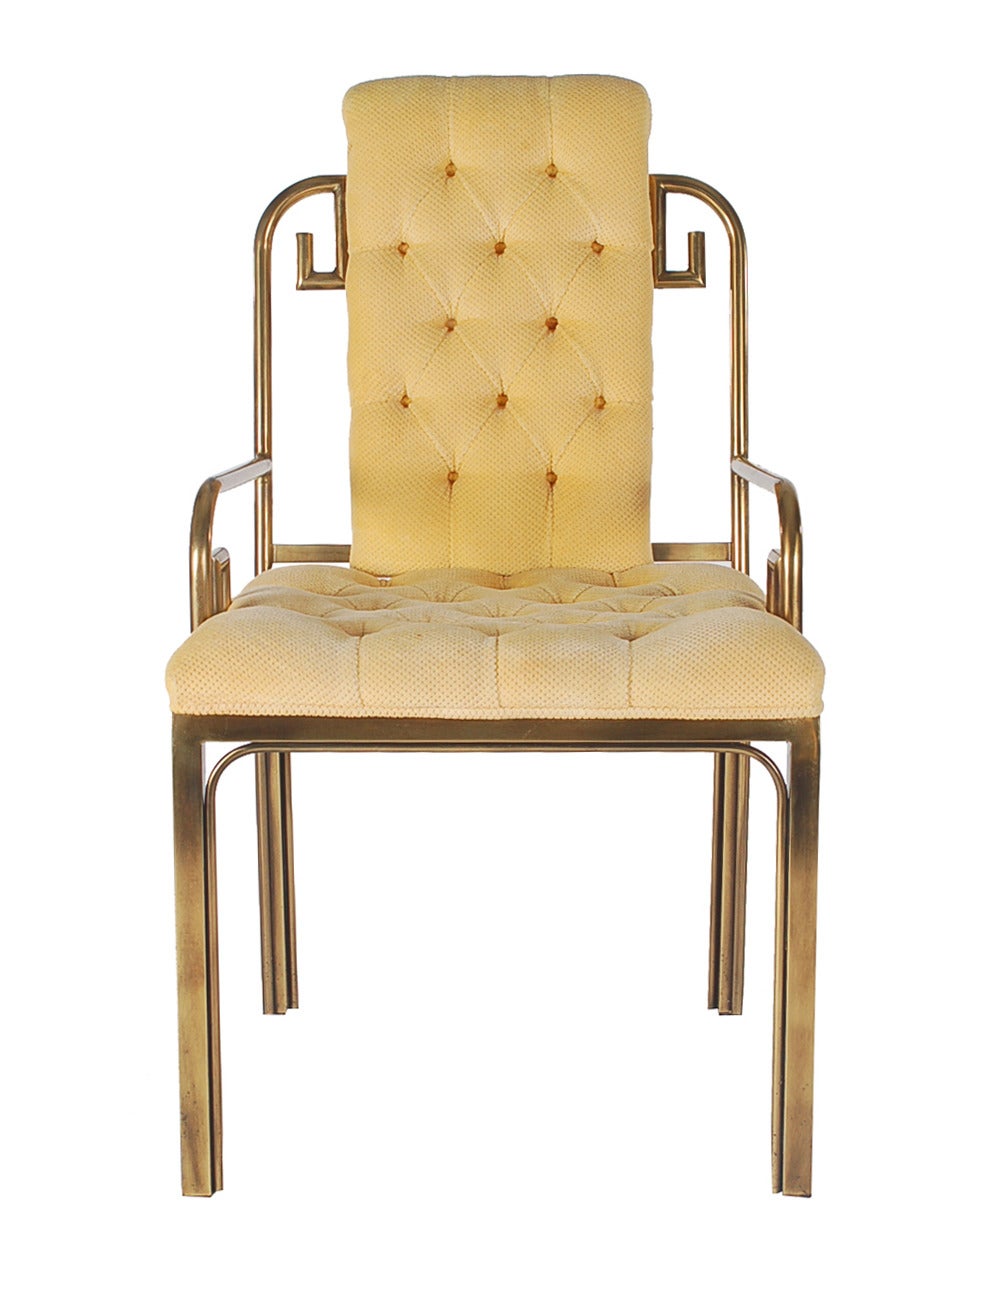 A decorative tufted armchair produced by Mastercraft. It features heavy solid warm patinated brass framing with original upholstery. 

In the style of: Maison Jansen, Karl Springer, James Mont, Bernard Rohne.